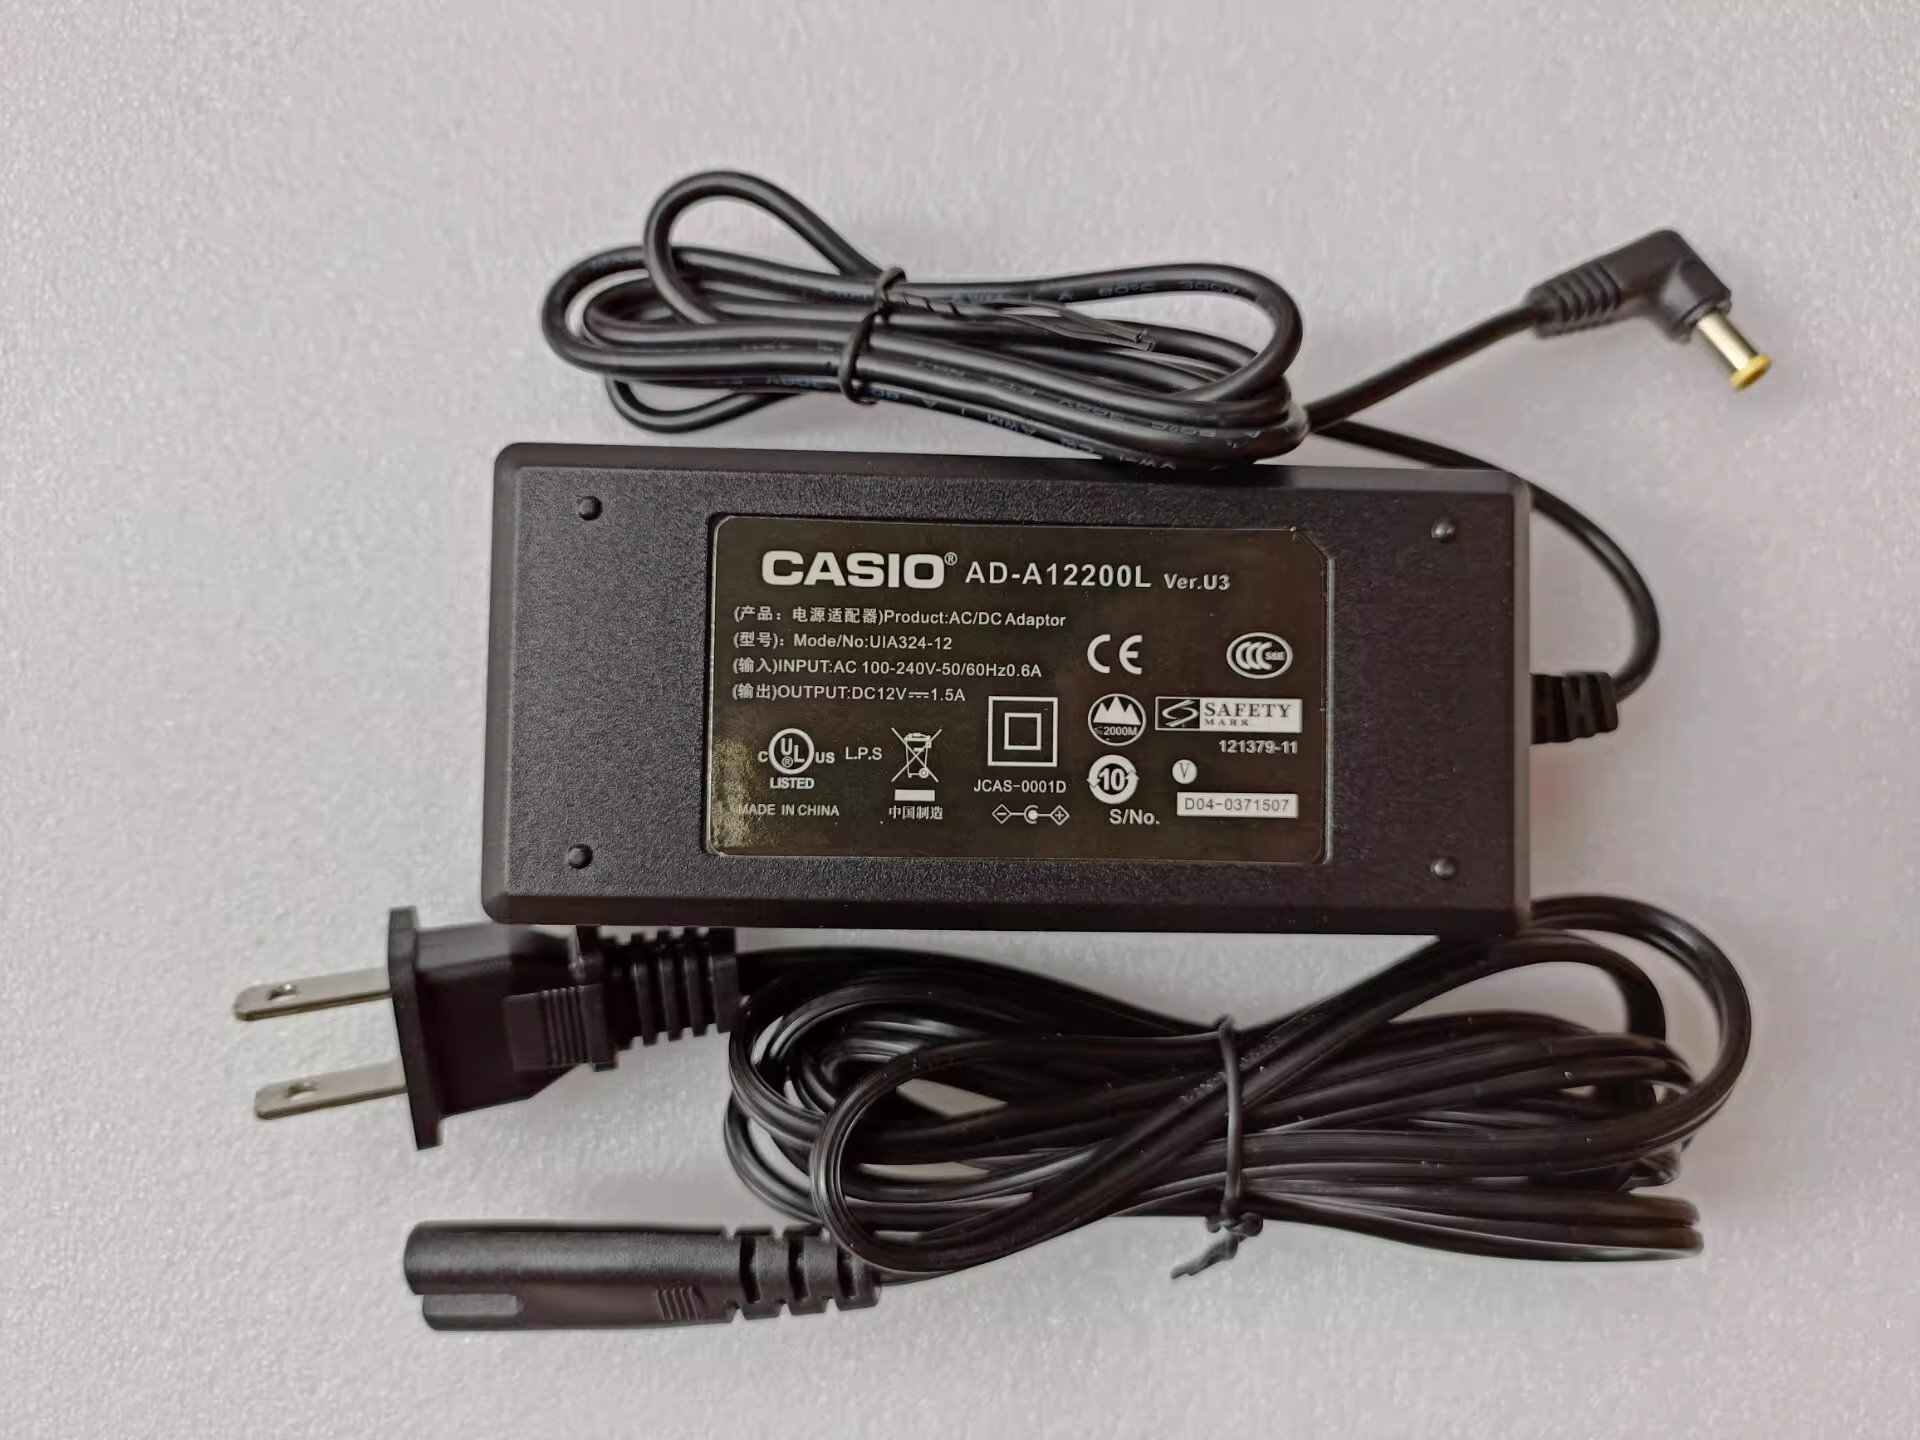 *Brand NEW* 12V 1.5A AC ADAPTER CASIO UIA324-12 PX-730 130 330 735 A100RD POWER Supply